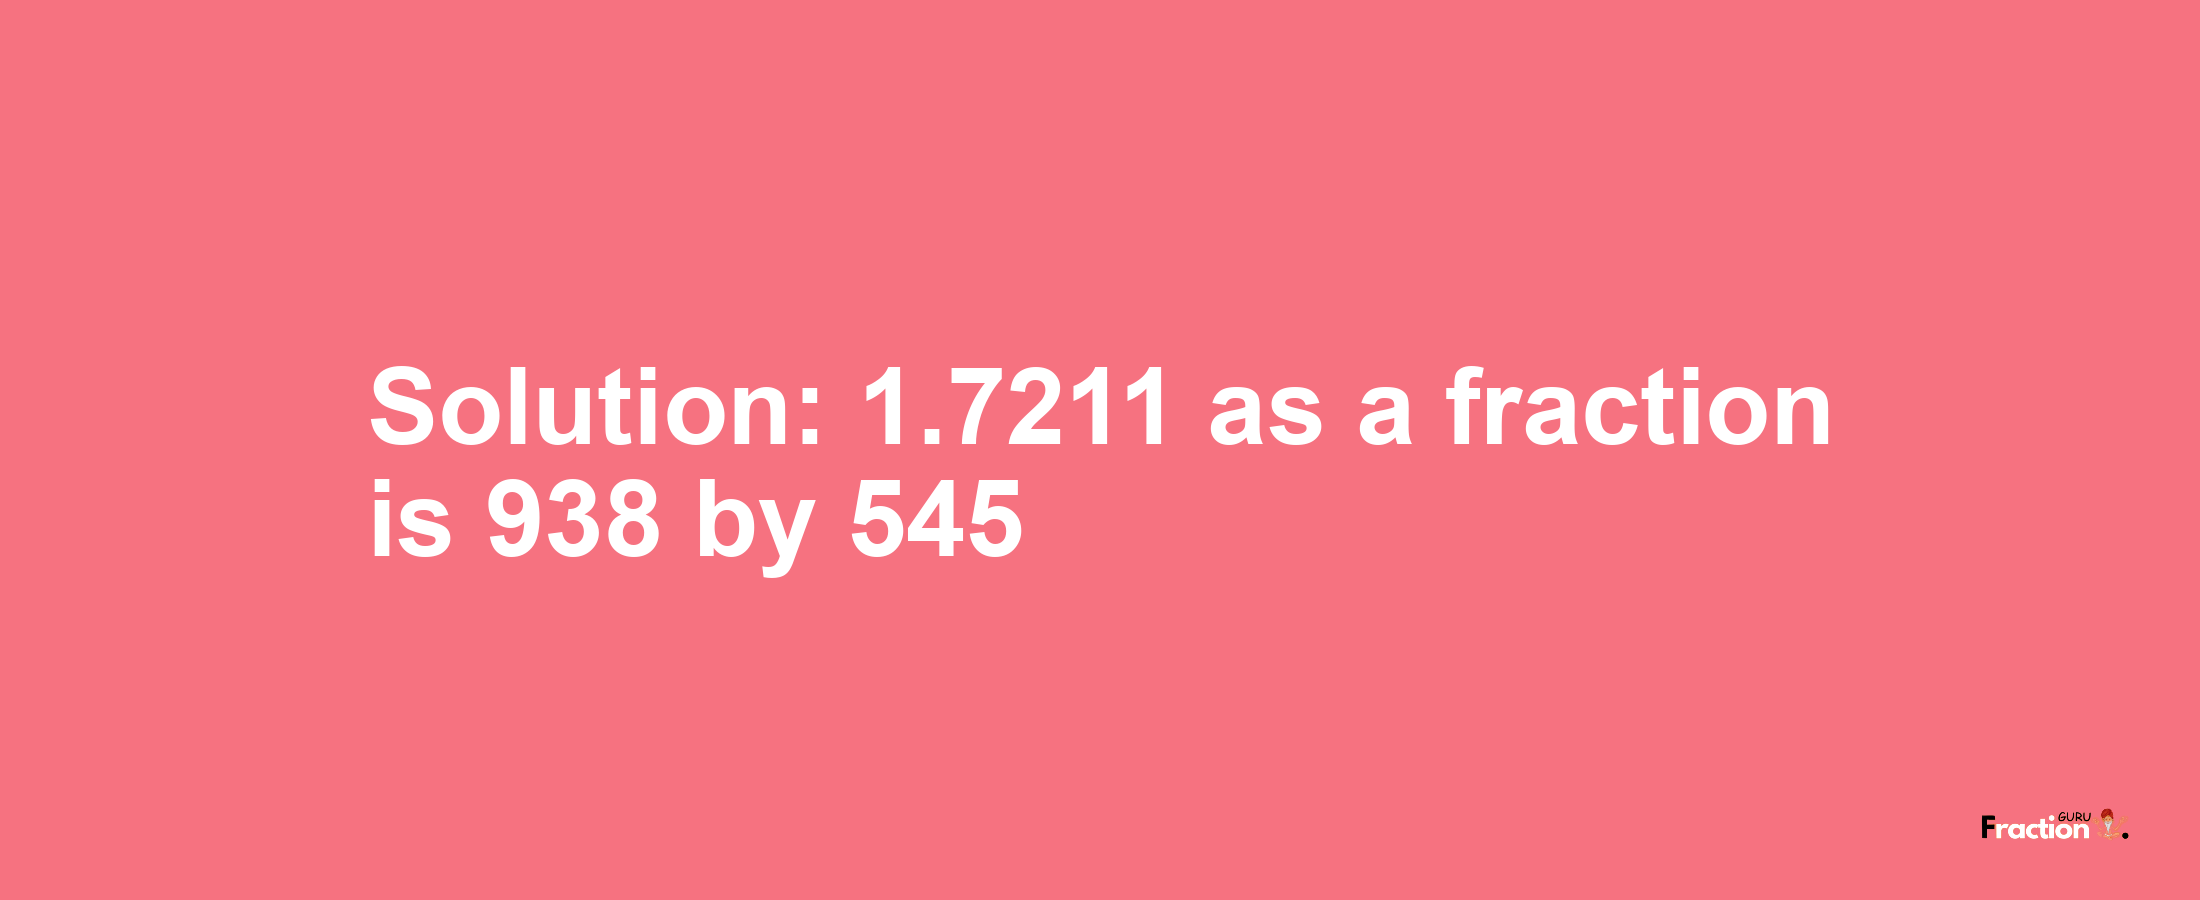 Solution:1.7211 as a fraction is 938/545